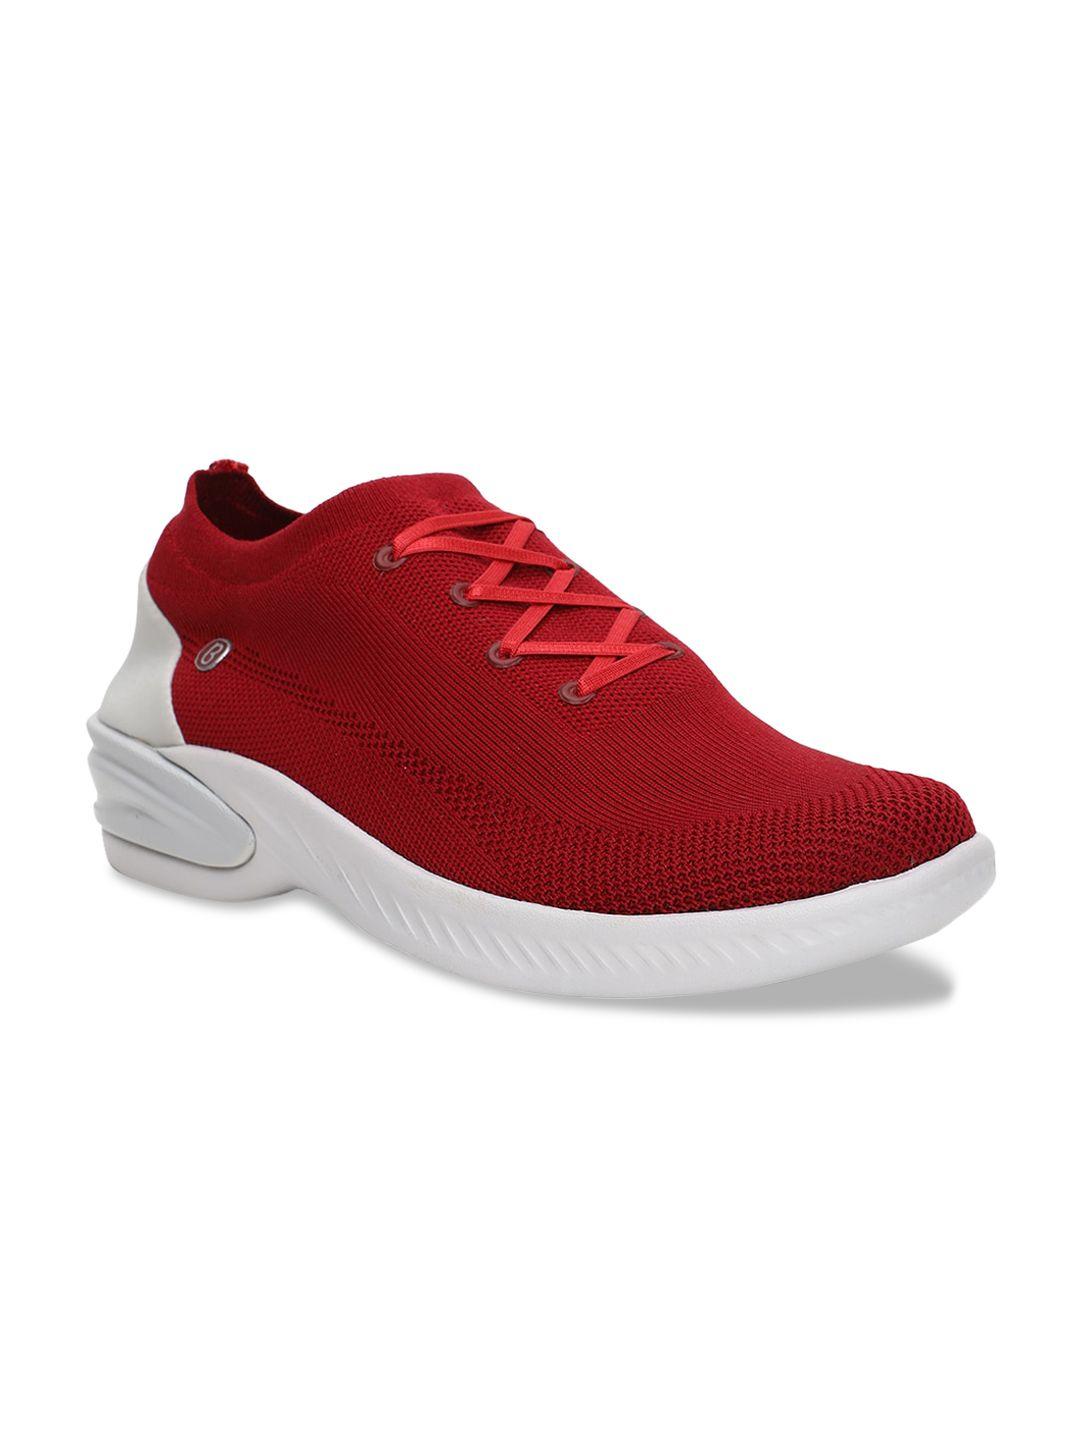 naturalizer women red woven design sneakers